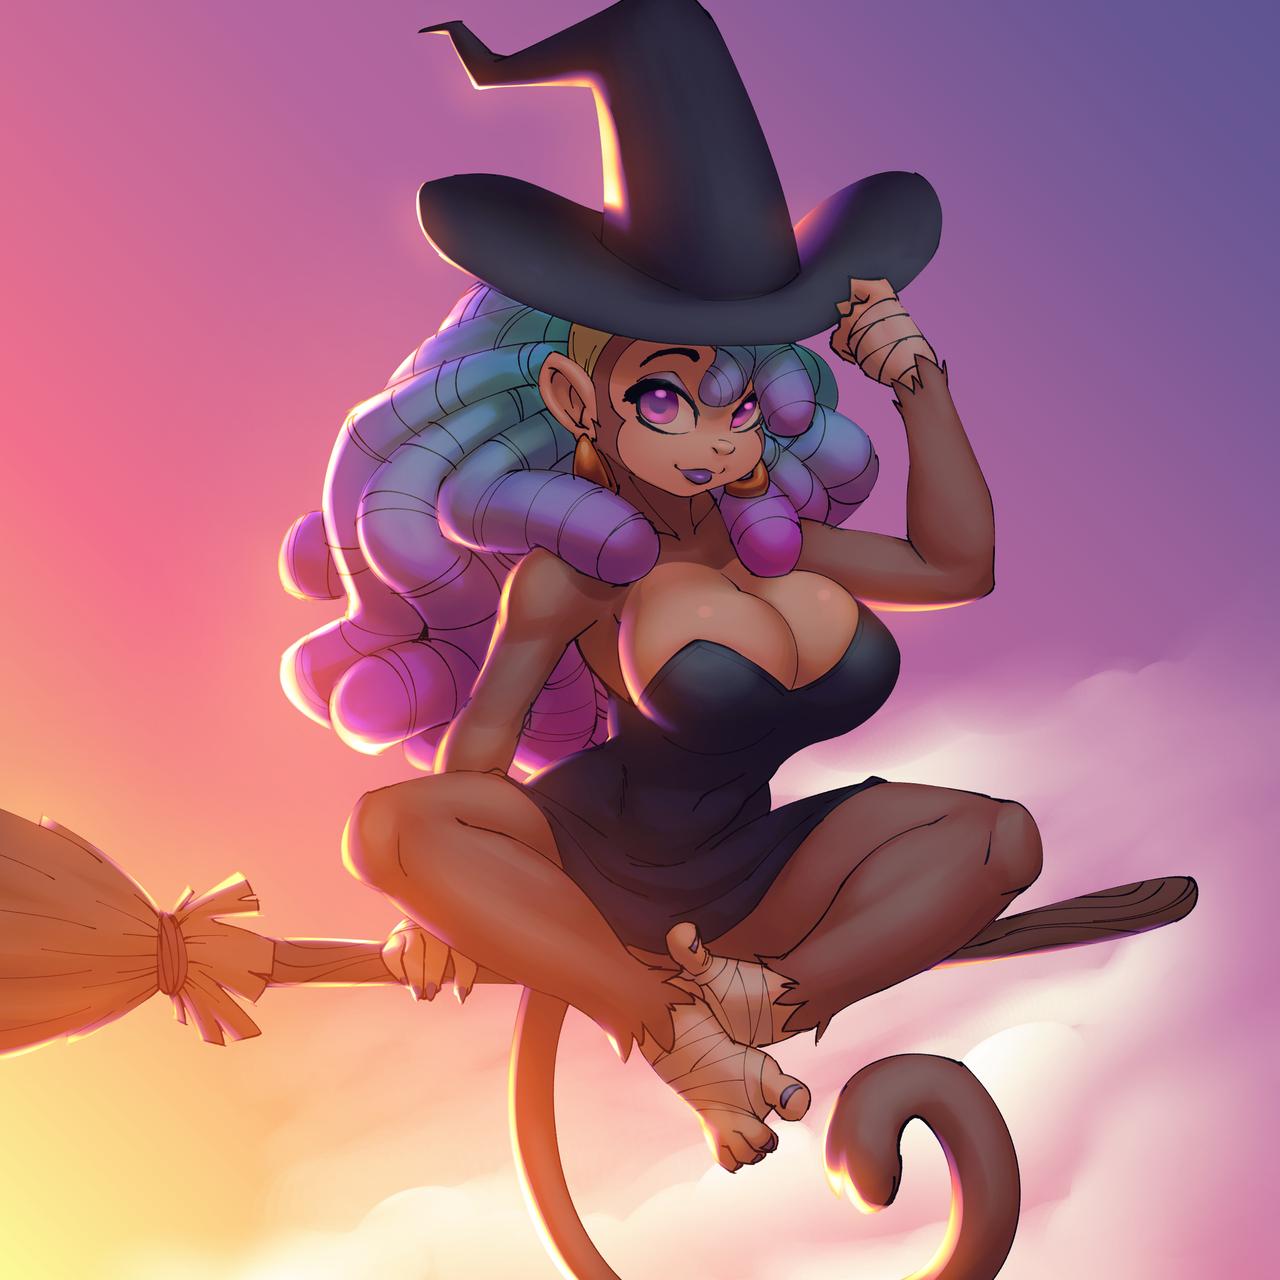 naira_steals_a_broomstick_by_benhickling_dcqrcz6-fullview